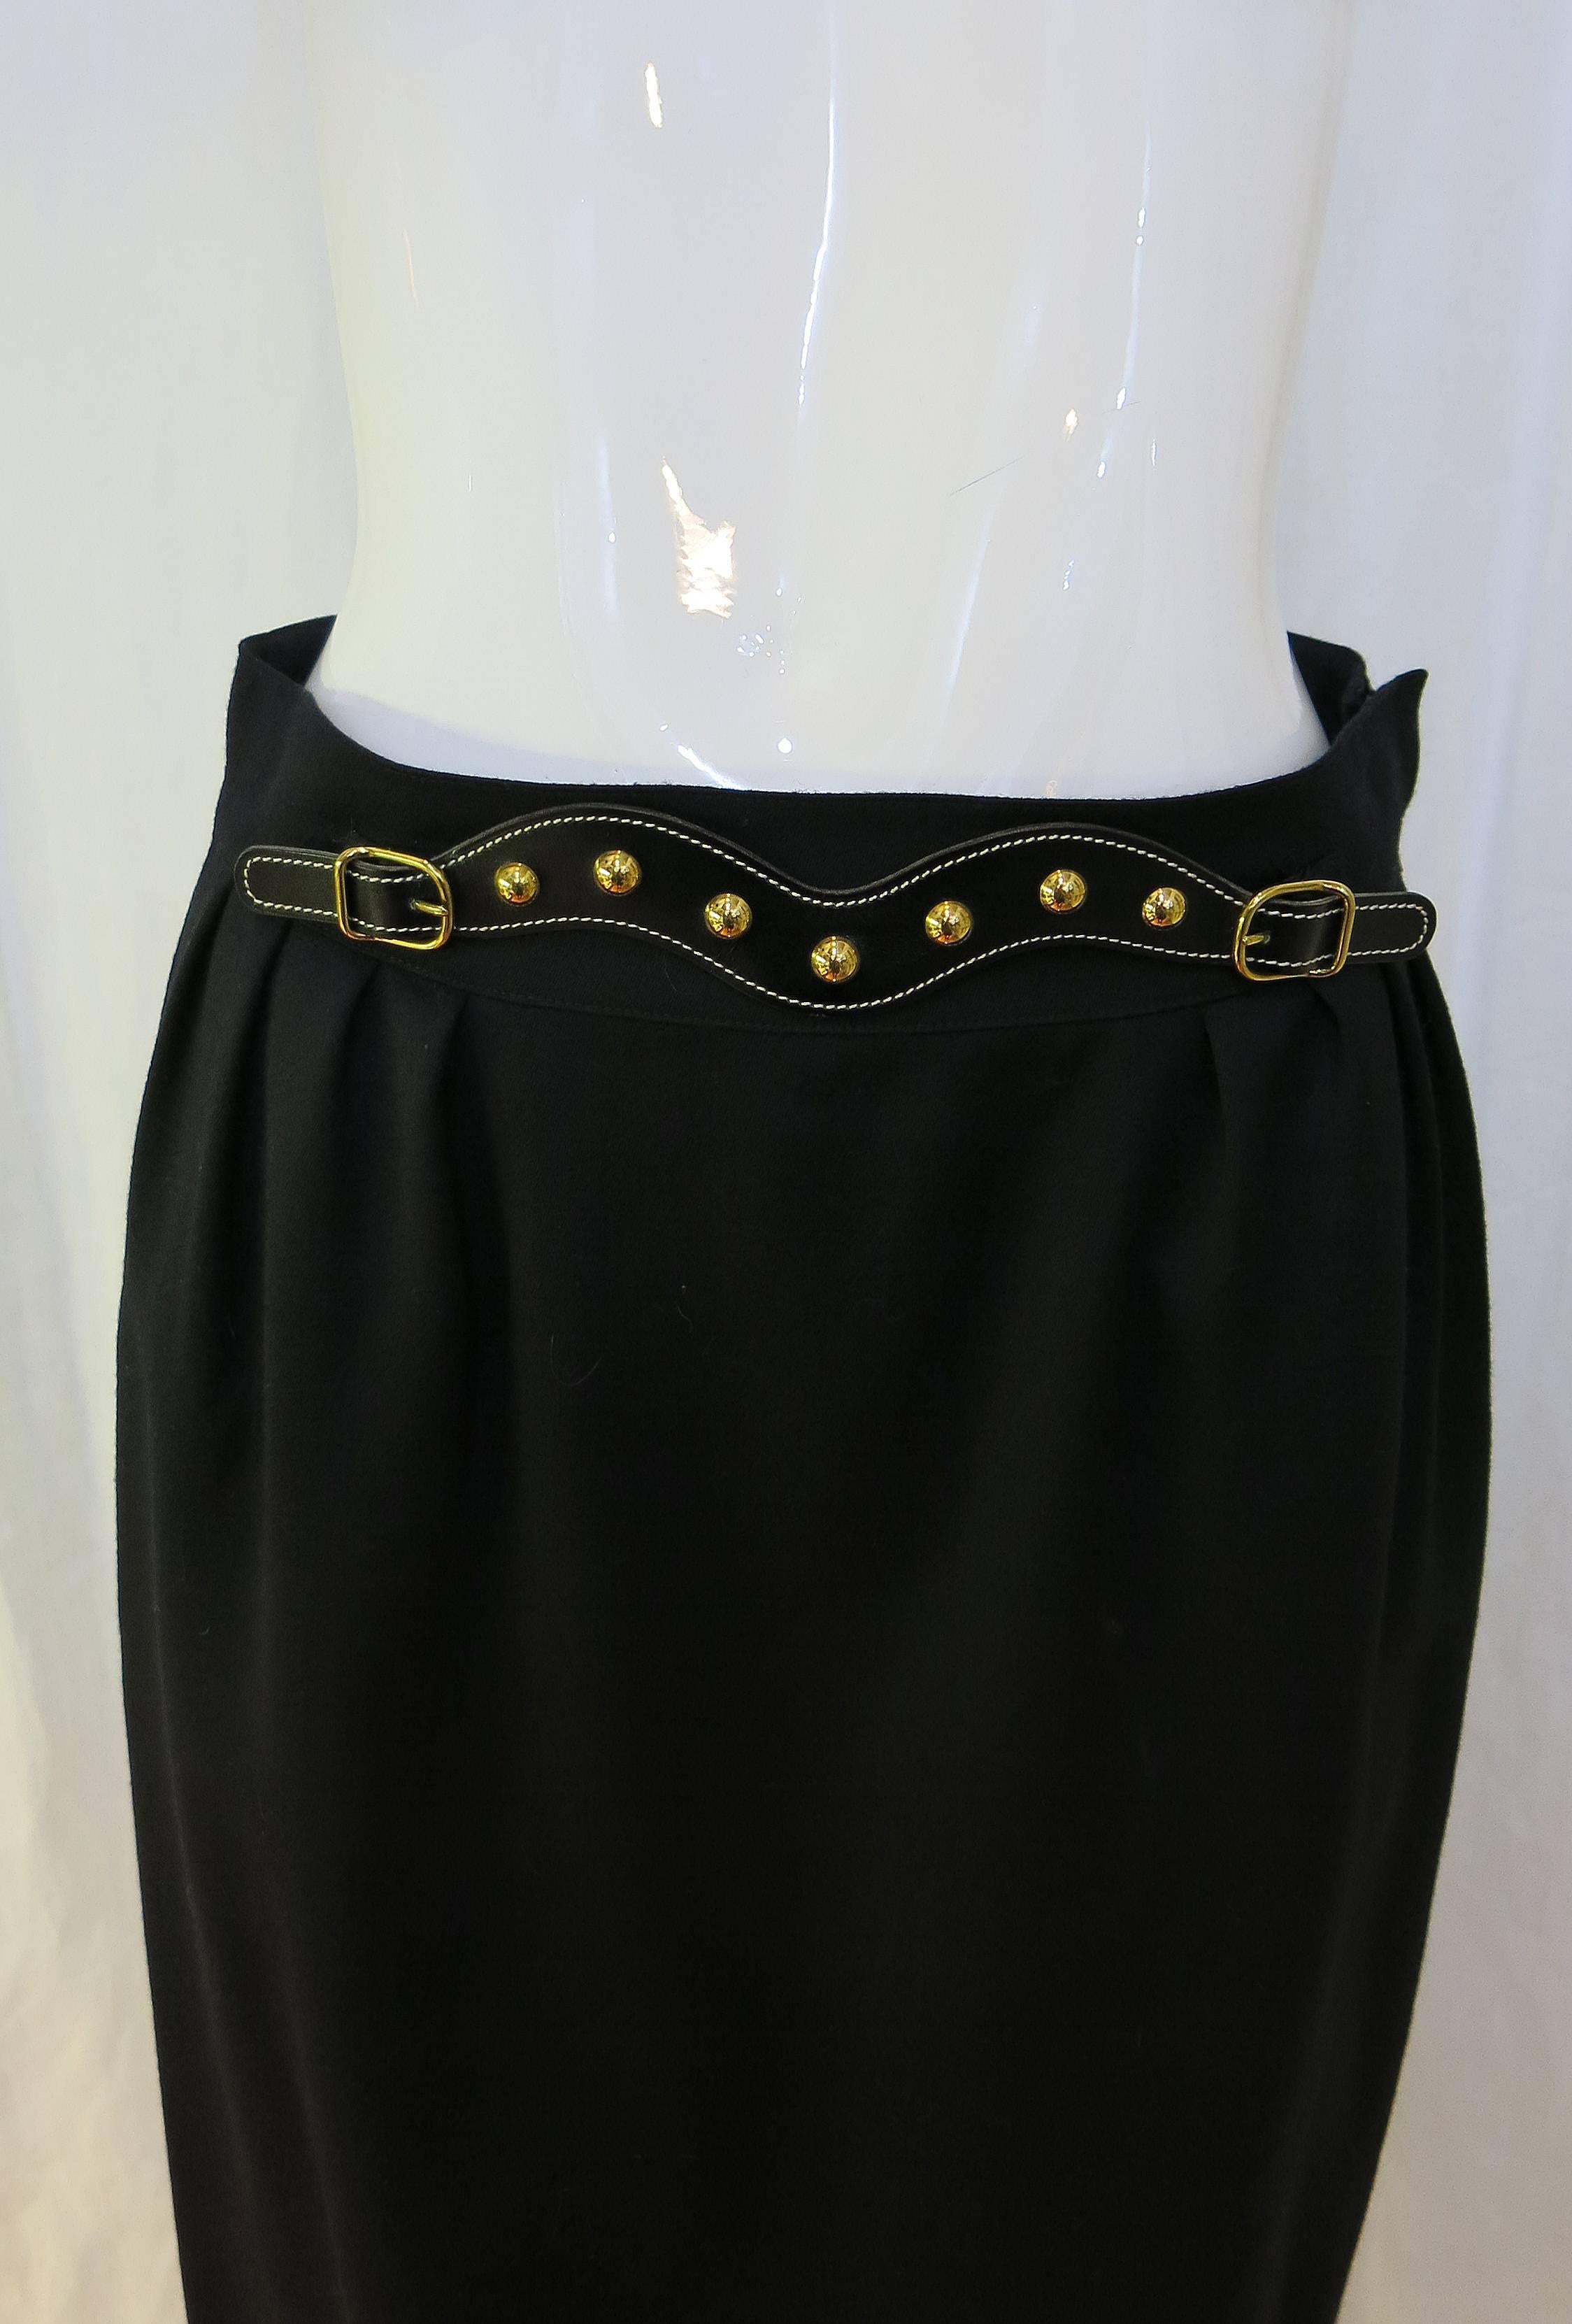 100% wool high waisted, knee length pencil skirt with decorative belt detail on front waist. Skirt has side pockets on either side and also zips on the side.

The skirt is timeless and would make a nice warm addition to any workplace wardrobe.